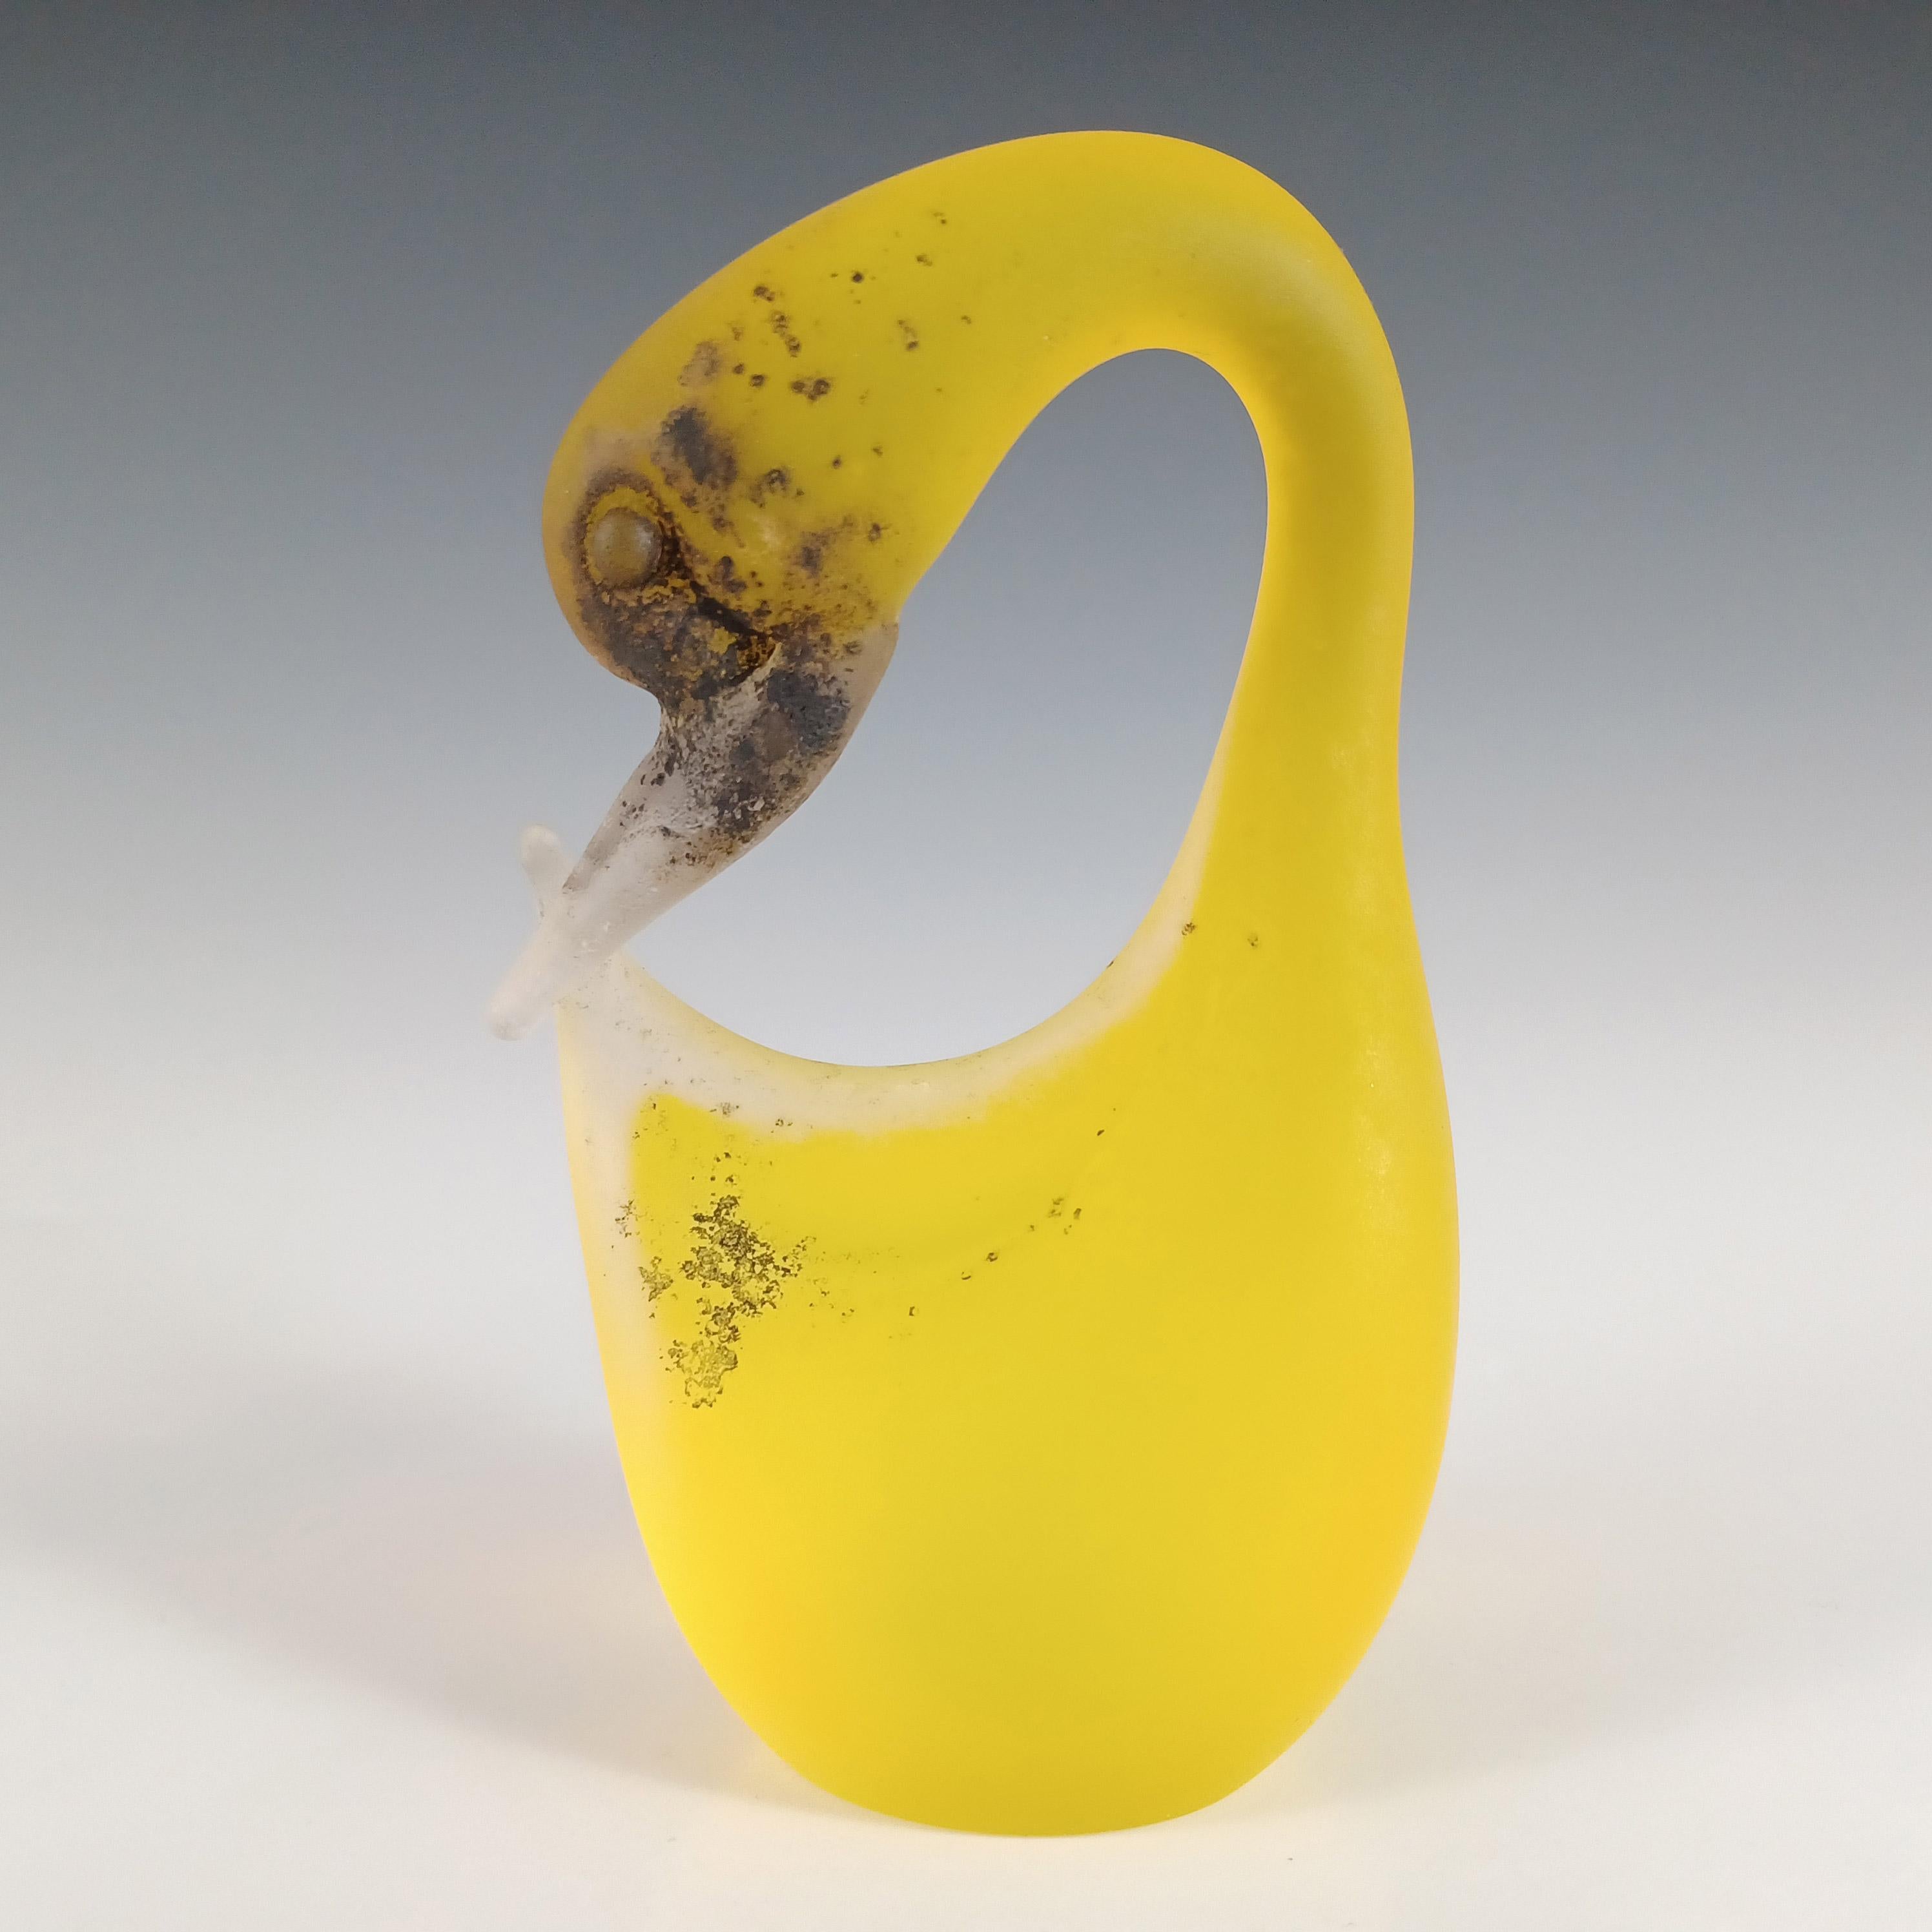 Here is a beautiful Venetian yellow glass swan sculpture, made on the island of Murano, near Venice, Italy. Made by Cenedese, signed to base. Produced in the Venetian scavo technique, which means 